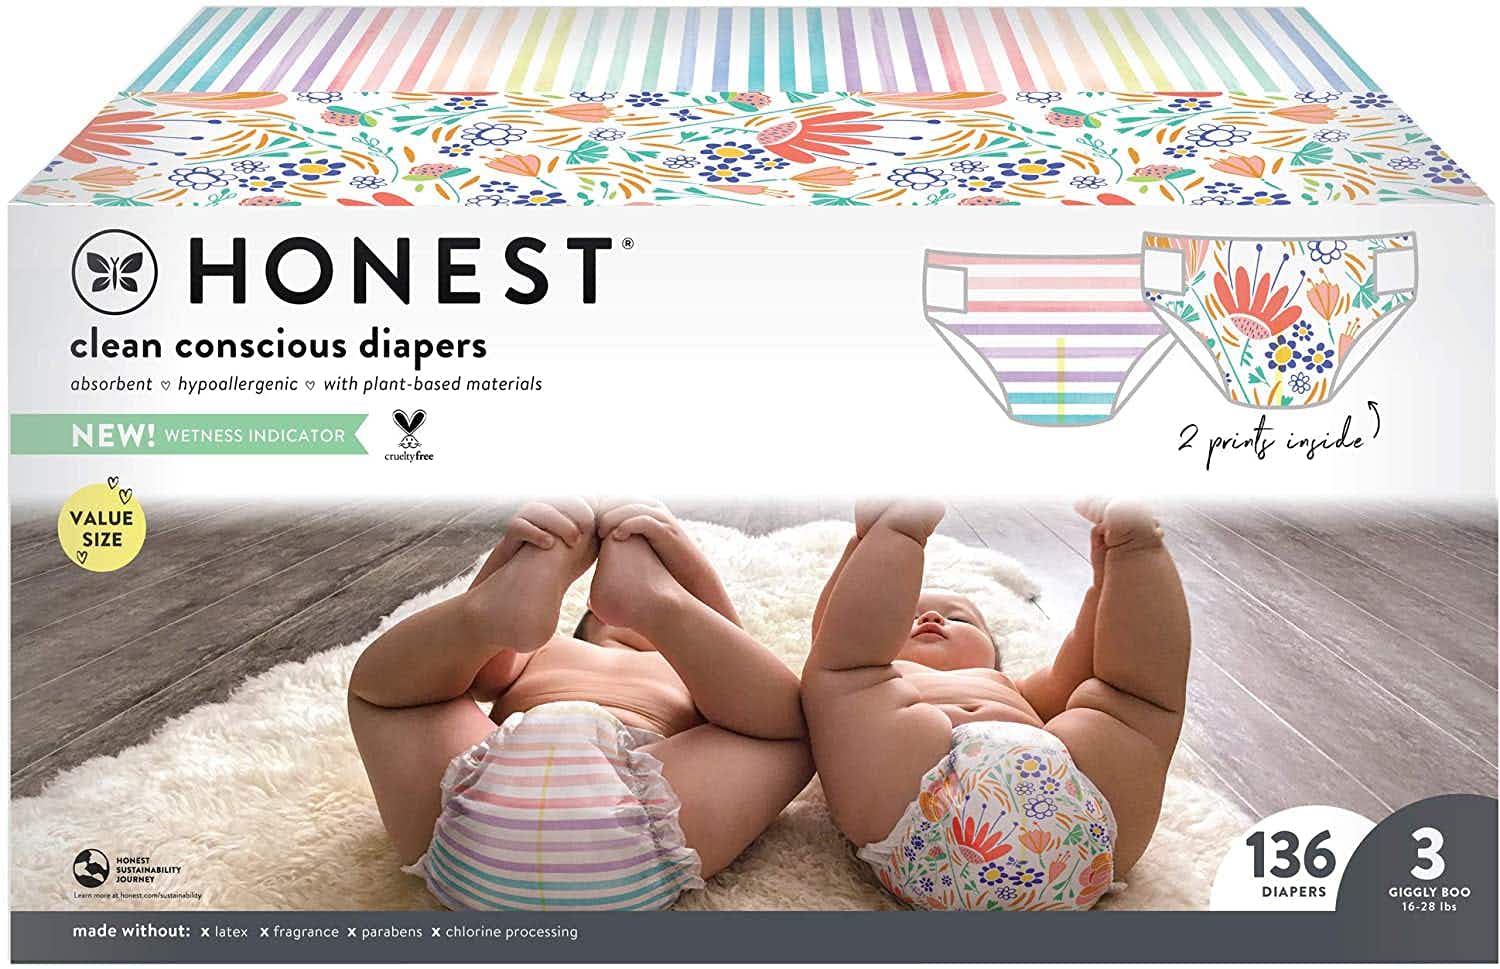 A box of The Honest Company size 3 diapers